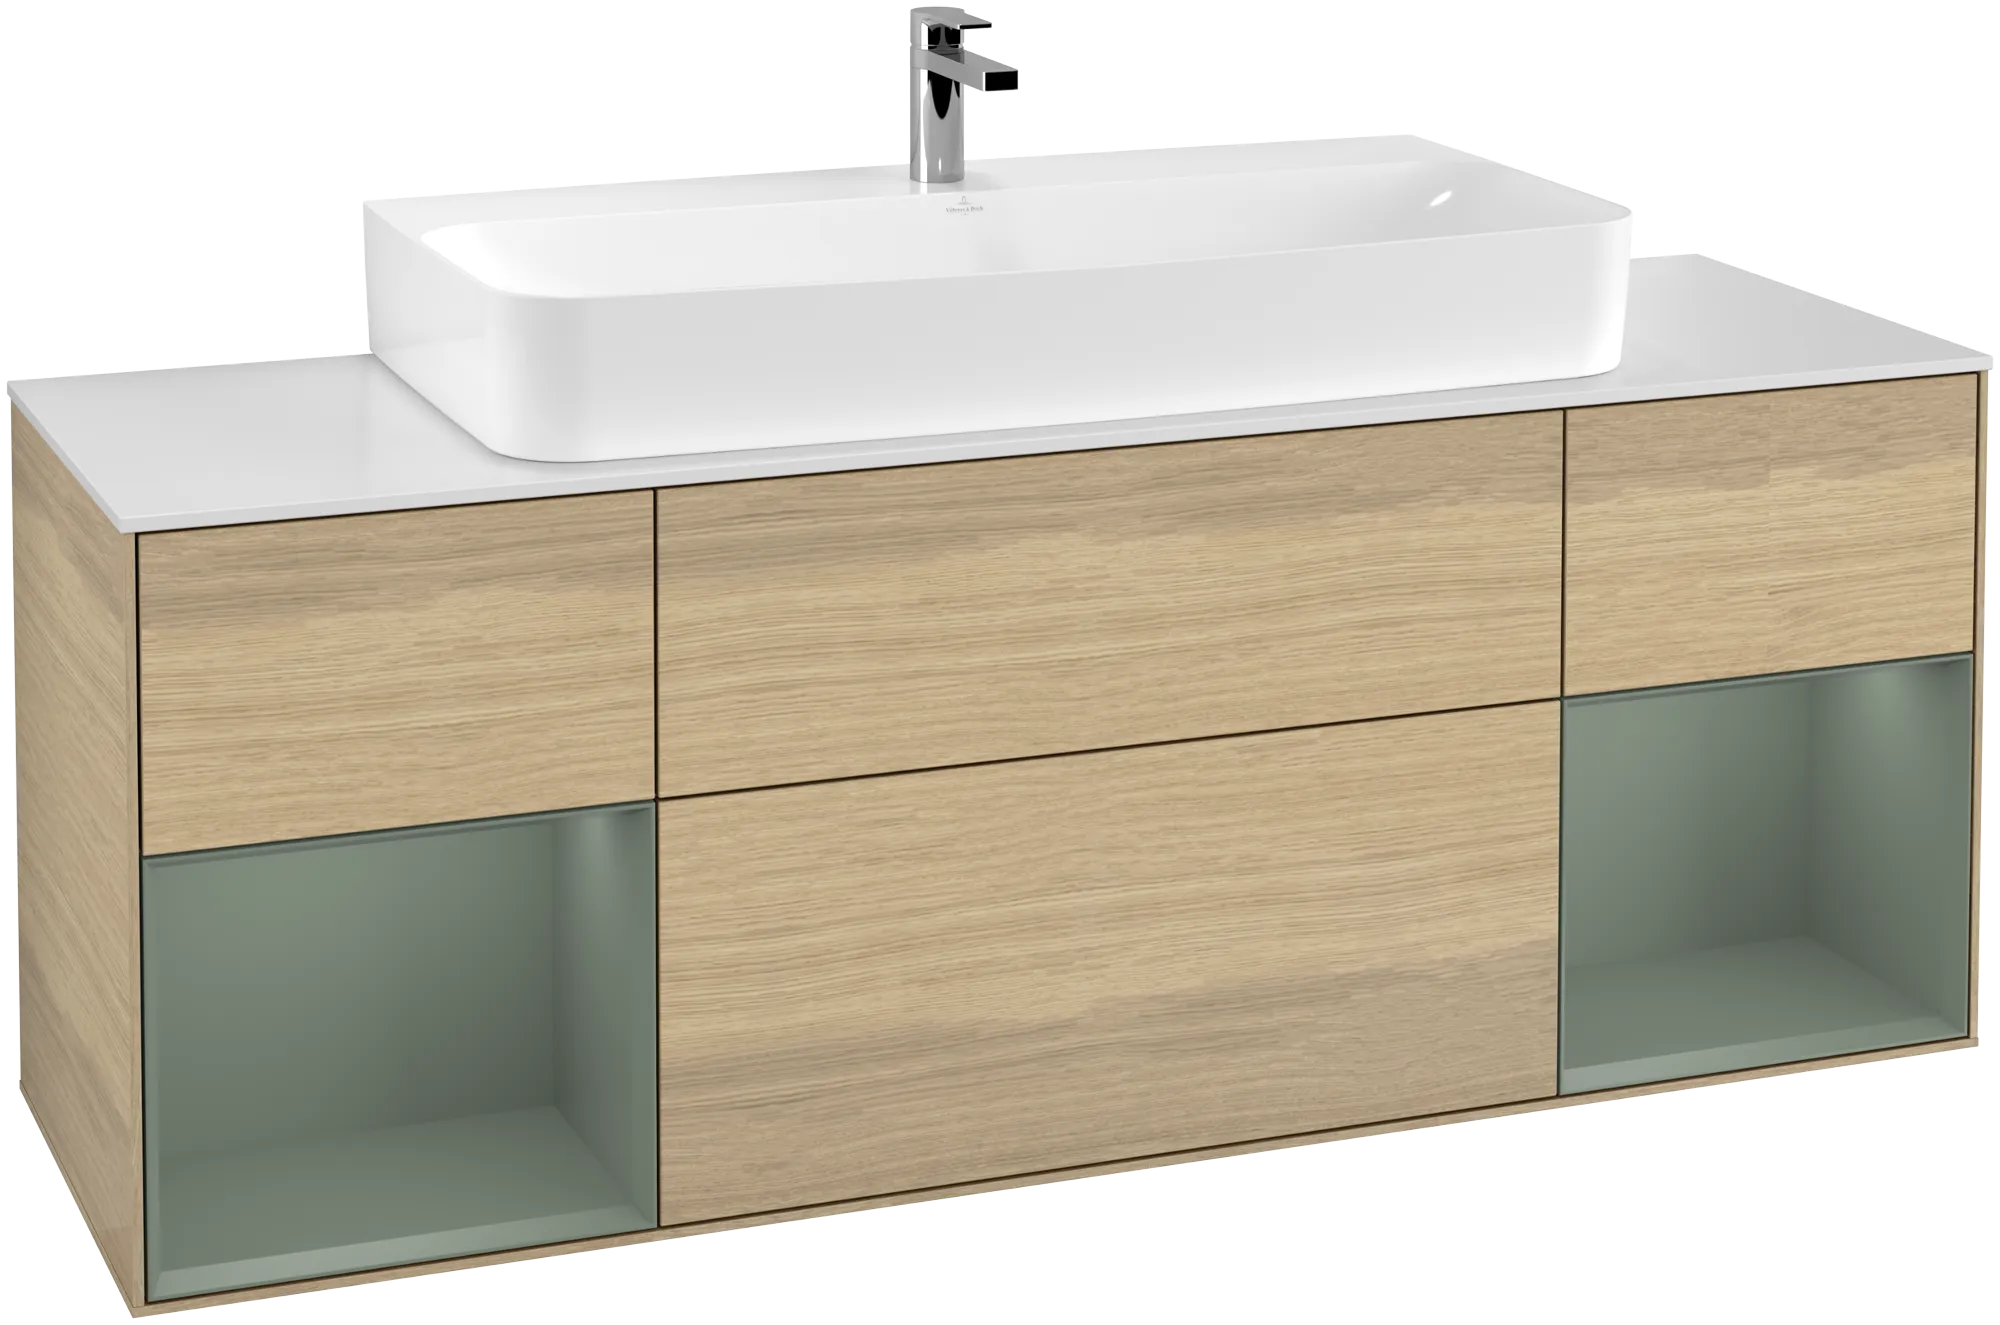 Picture of VILLEROY BOCH Finion Vanity unit, with lighting, 4 pull-out compartments, 1600 x 603 x 501 mm, Oak Veneer / Olive Matt Lacquer / Glass White Matt #G211GMPC